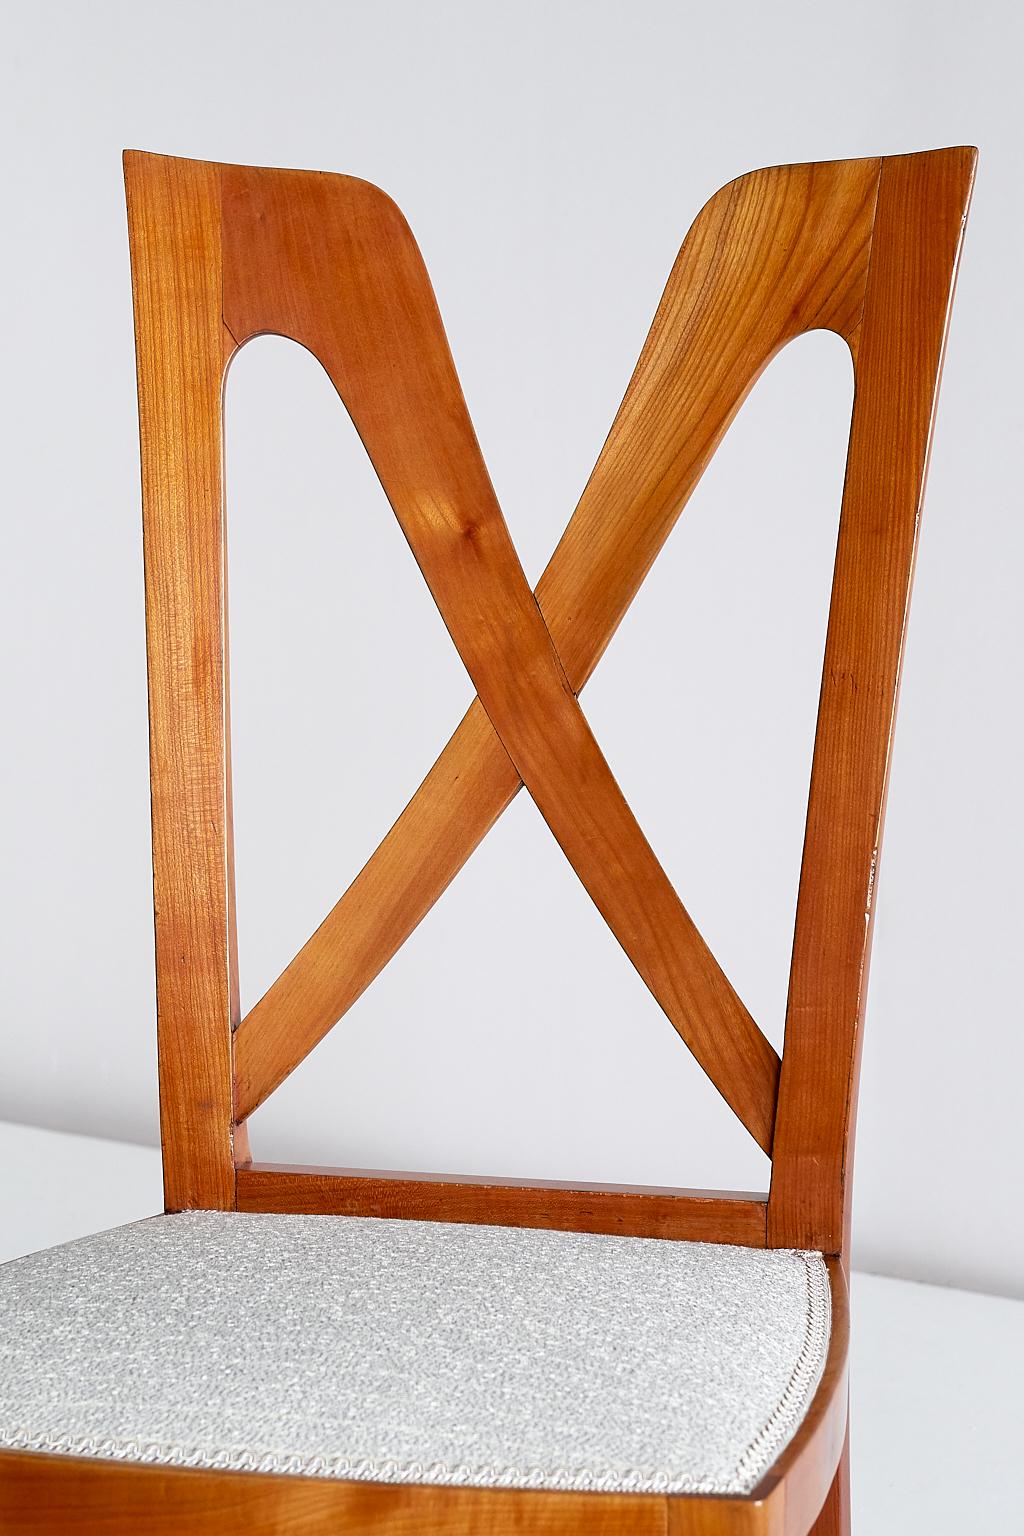 Set of Six Ulderico Carlo Forni Dining Chairs in Cherry Wood, Italy, 1940s For Sale 8